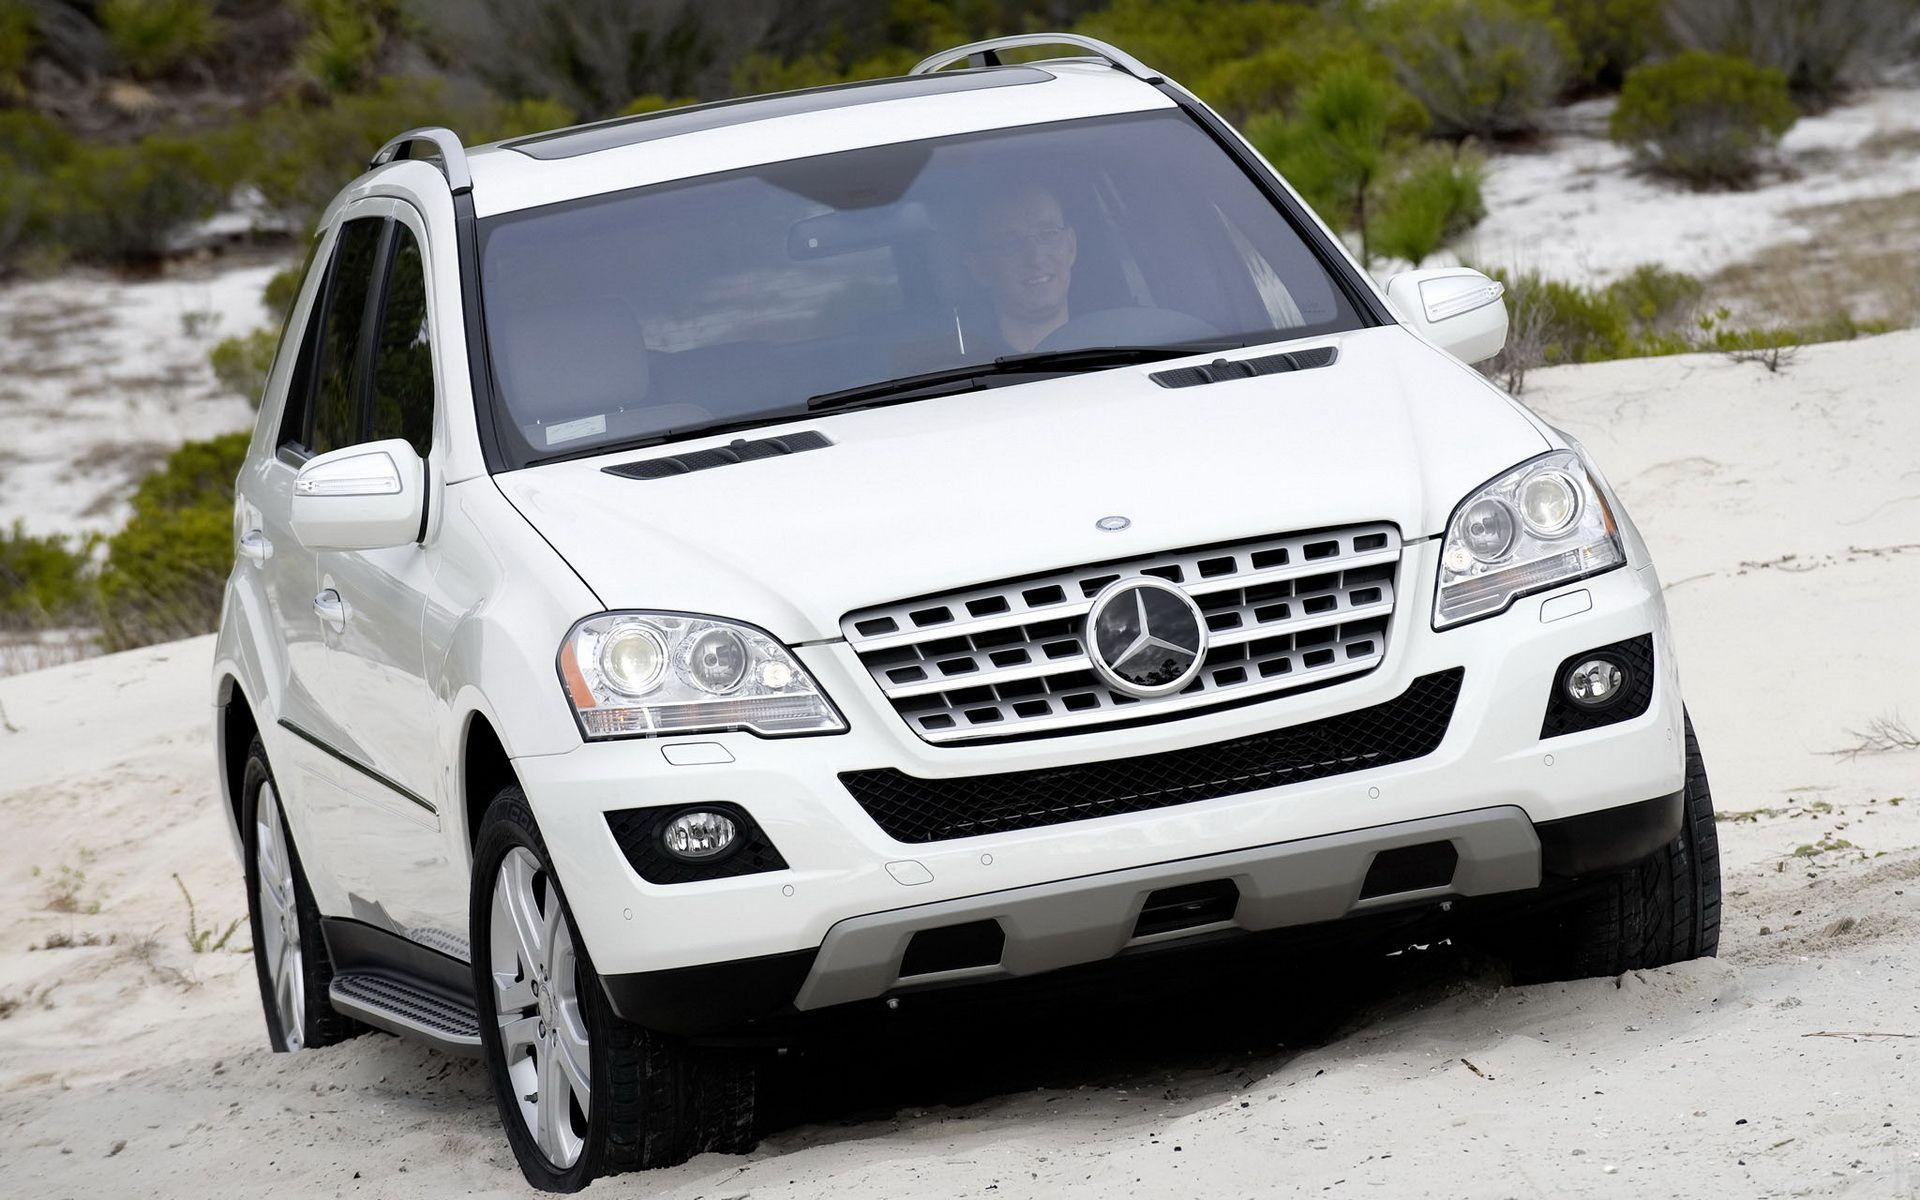 Mercedes Benz ML320 Wallpaper And Image, Picture